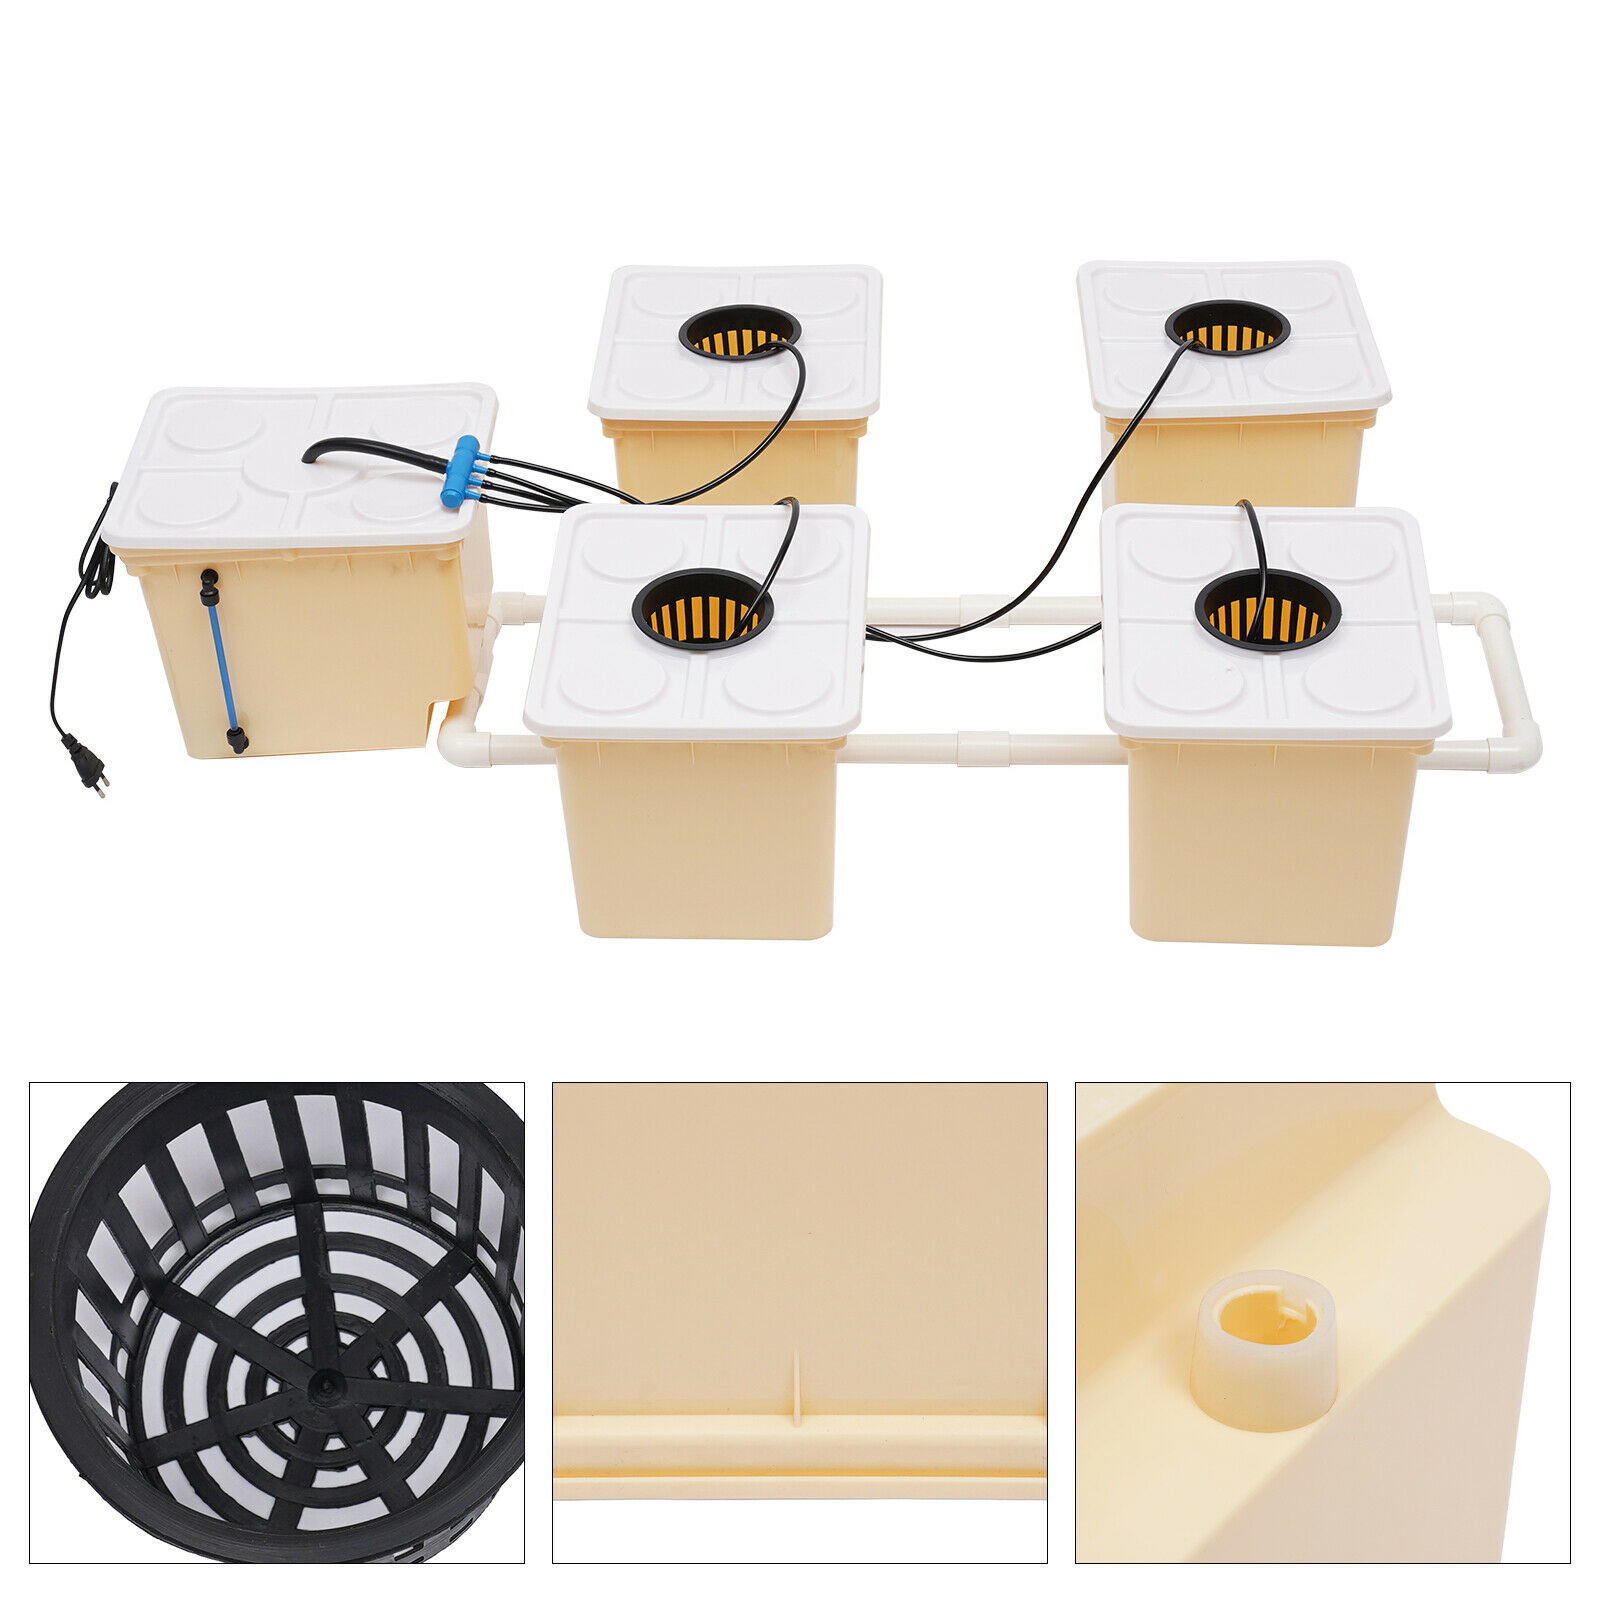 Hydroponic Deep Water Culture (DWC) & Drip Ring Grow System Kits All Included 🔥